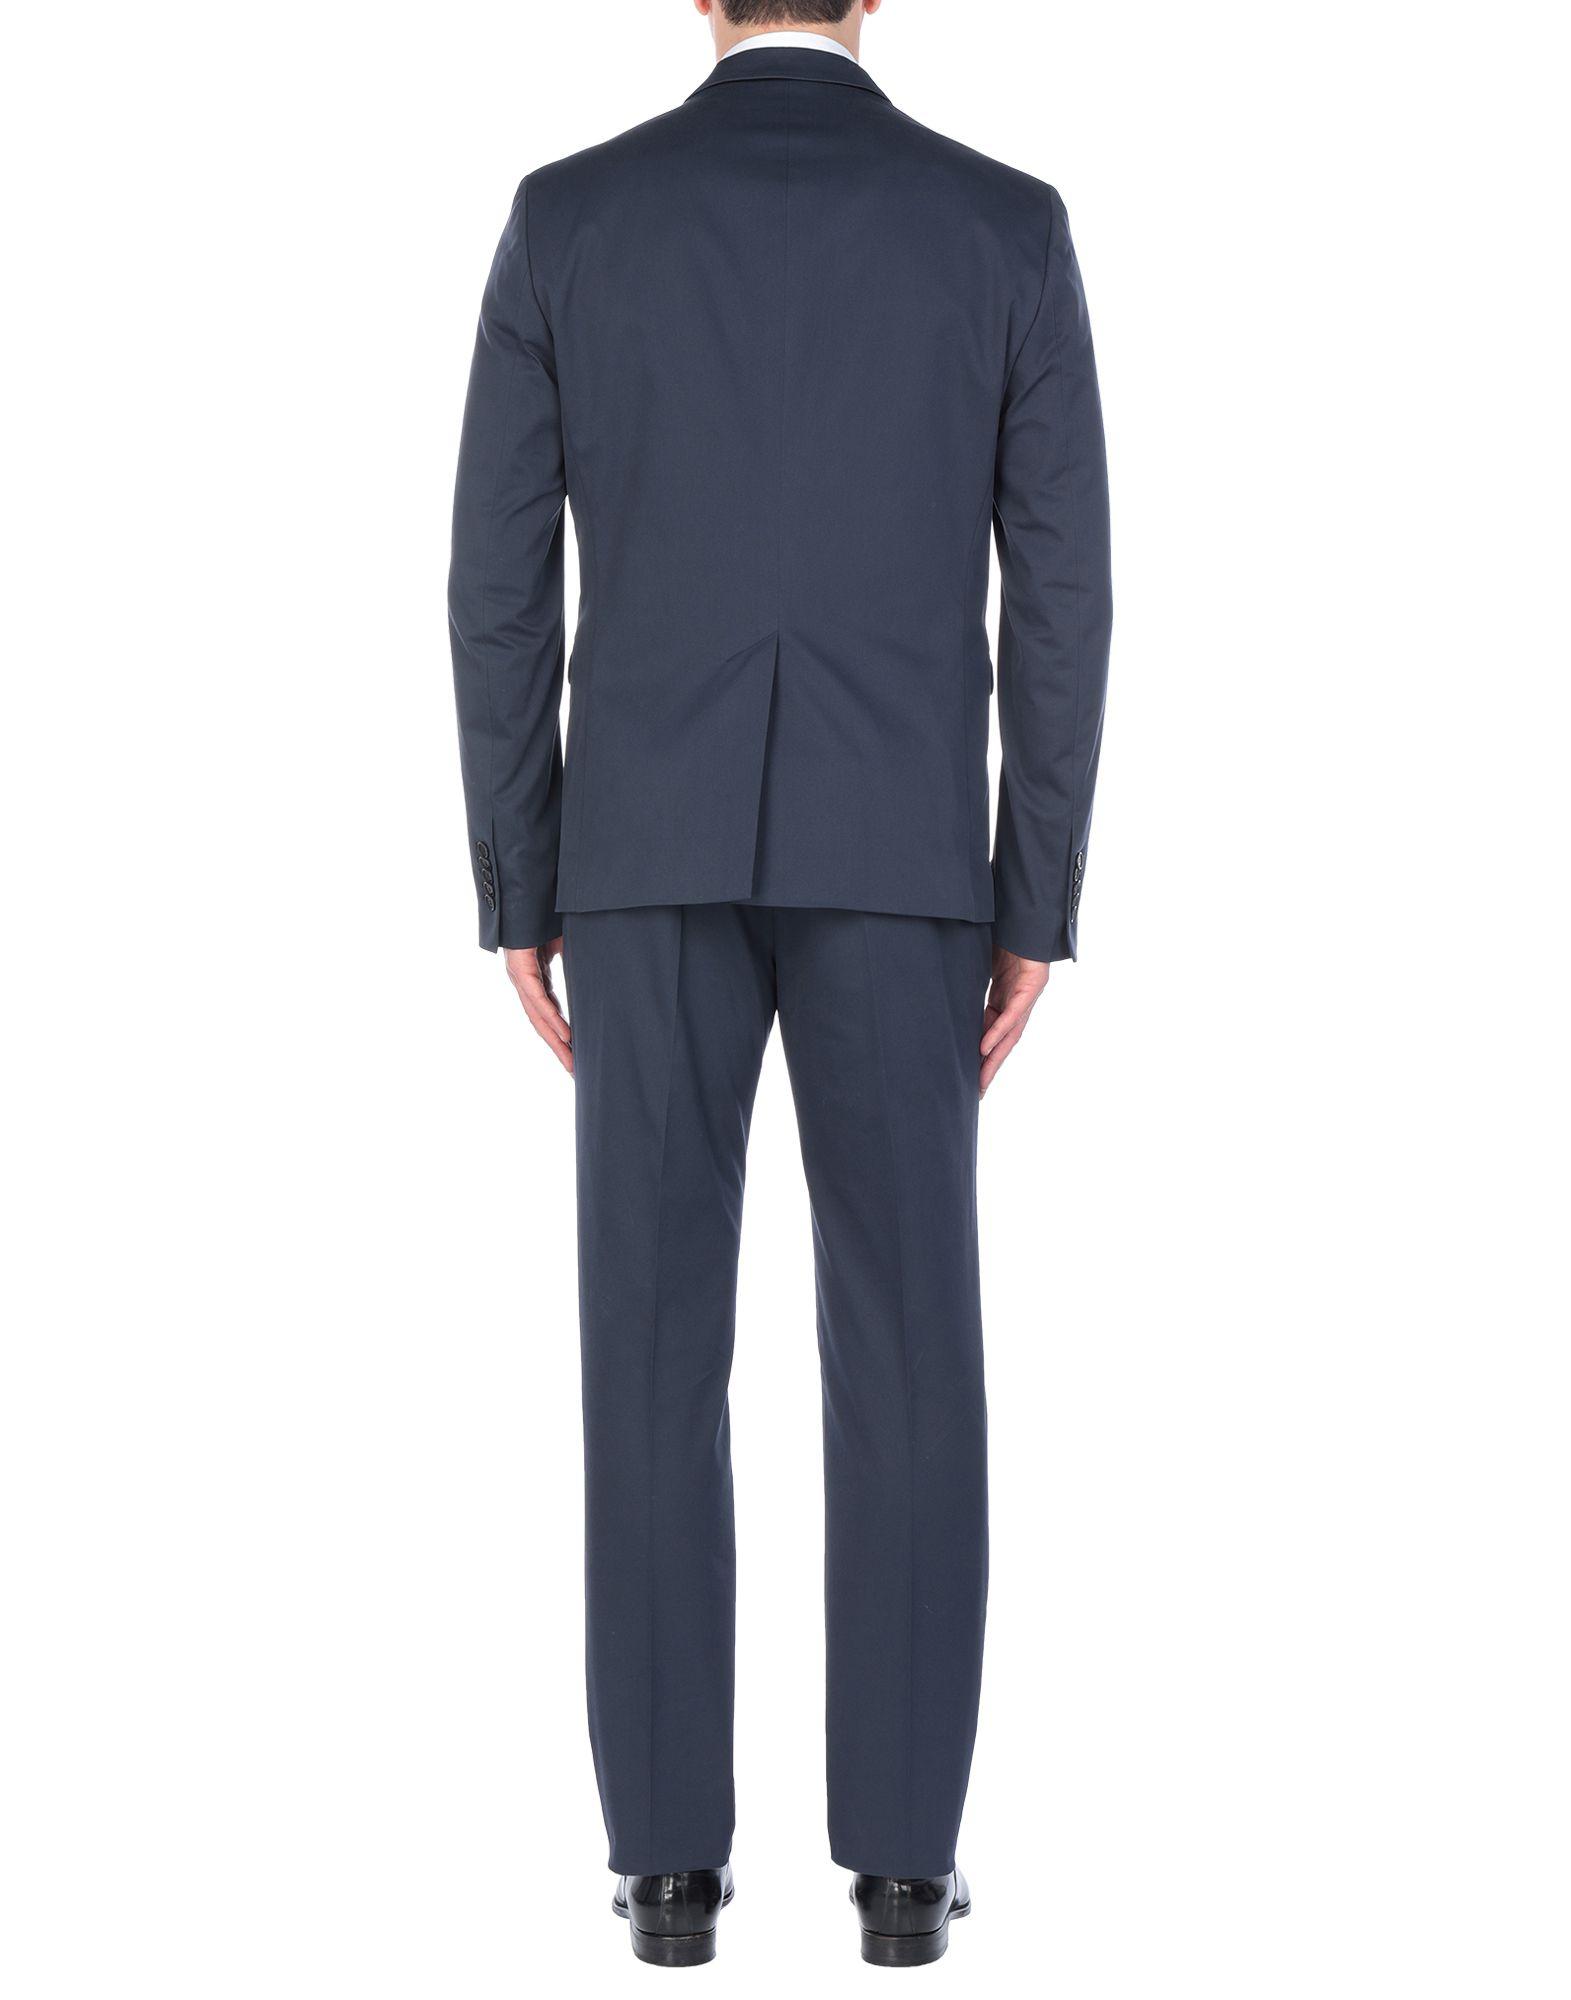 Patrizia Pepe Synthetic Suit in Blue for Men - Lyst